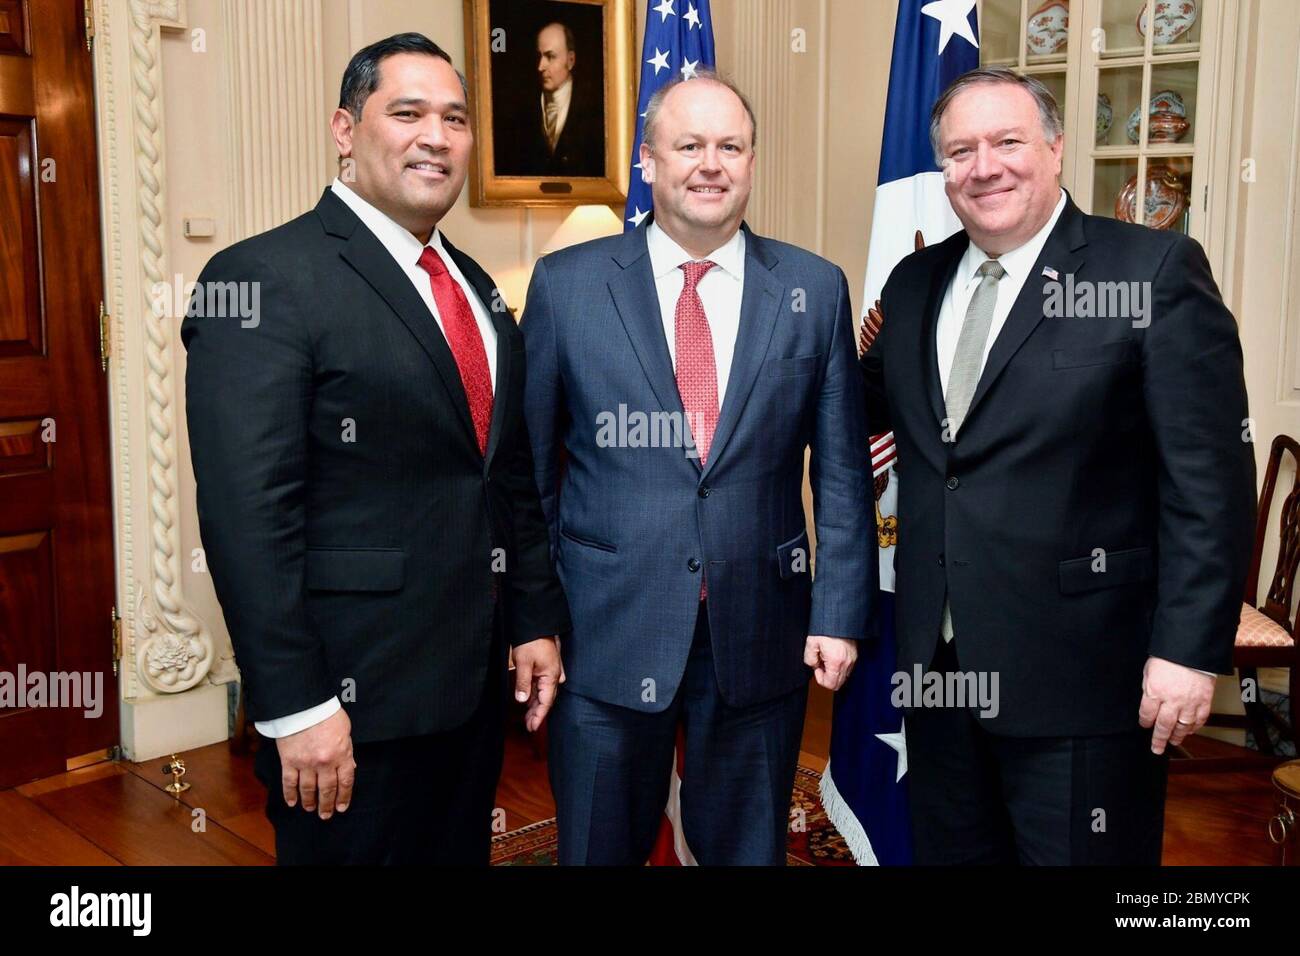 Secretary Pompeo Swears in Brian Bulatao as the new Under Secretary of State for Management U.S. Secretary of State Michael R. Pompeo swears in Brian Bulatao as the new Under Secretary of State for Management at the U.S. Department of State in Washington, D.C., on May 17, 2019. Stock Photo